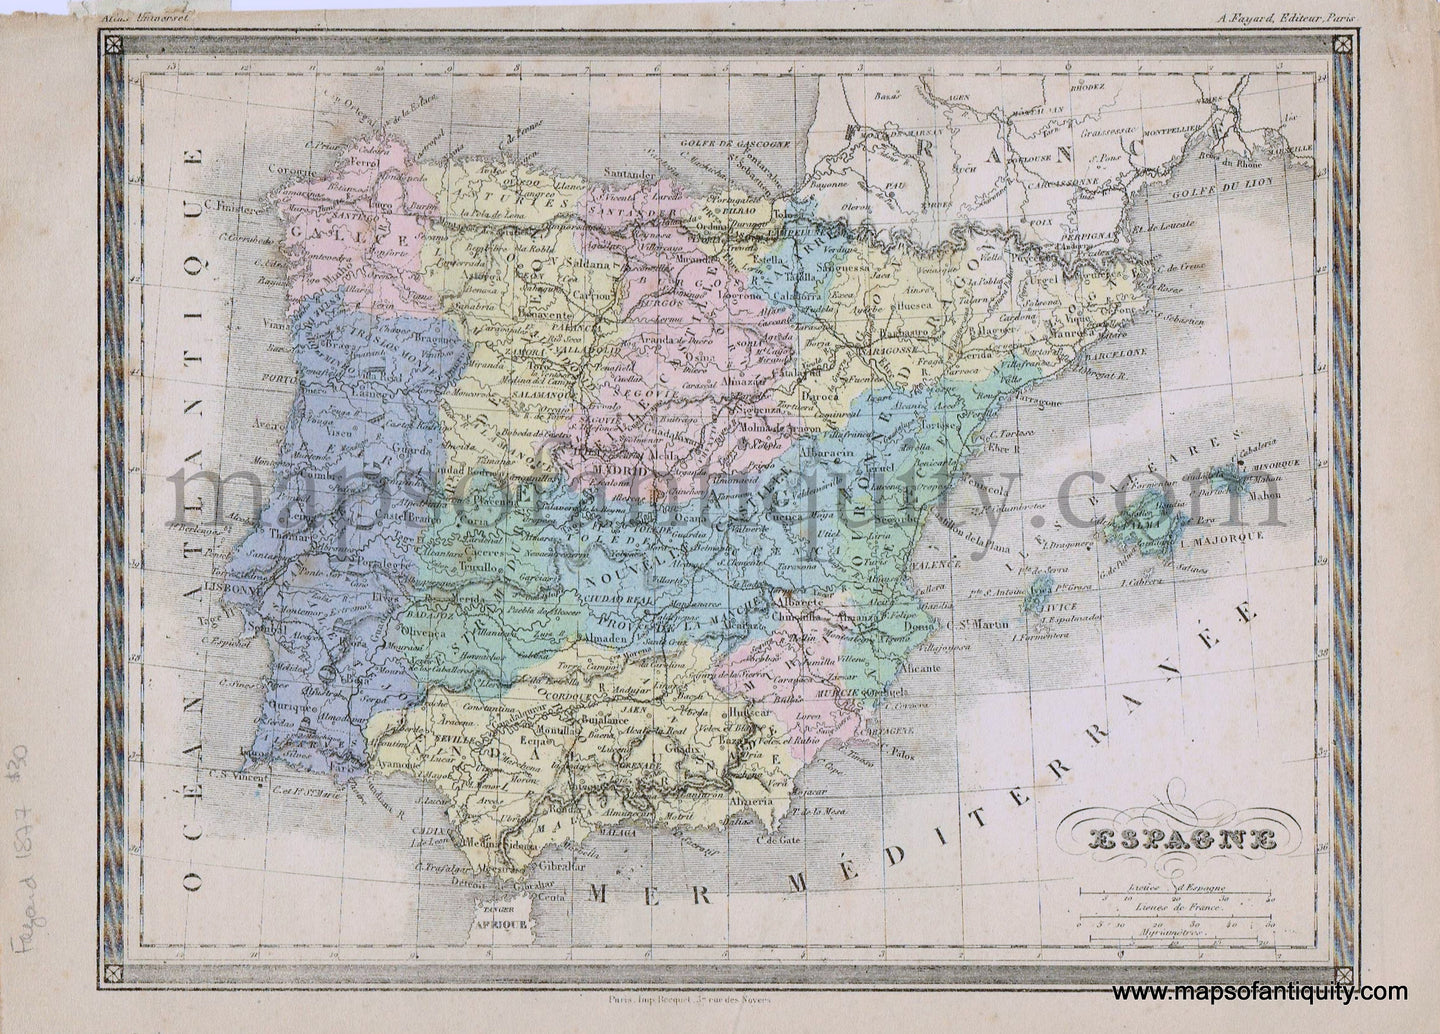 Antique-Printed-Color-Map-Europe-Espagne---Spain-and-Portugal-1877-Fayard-Spain-and-Portugal-1800s-19th-century-Maps-of-Antiquity